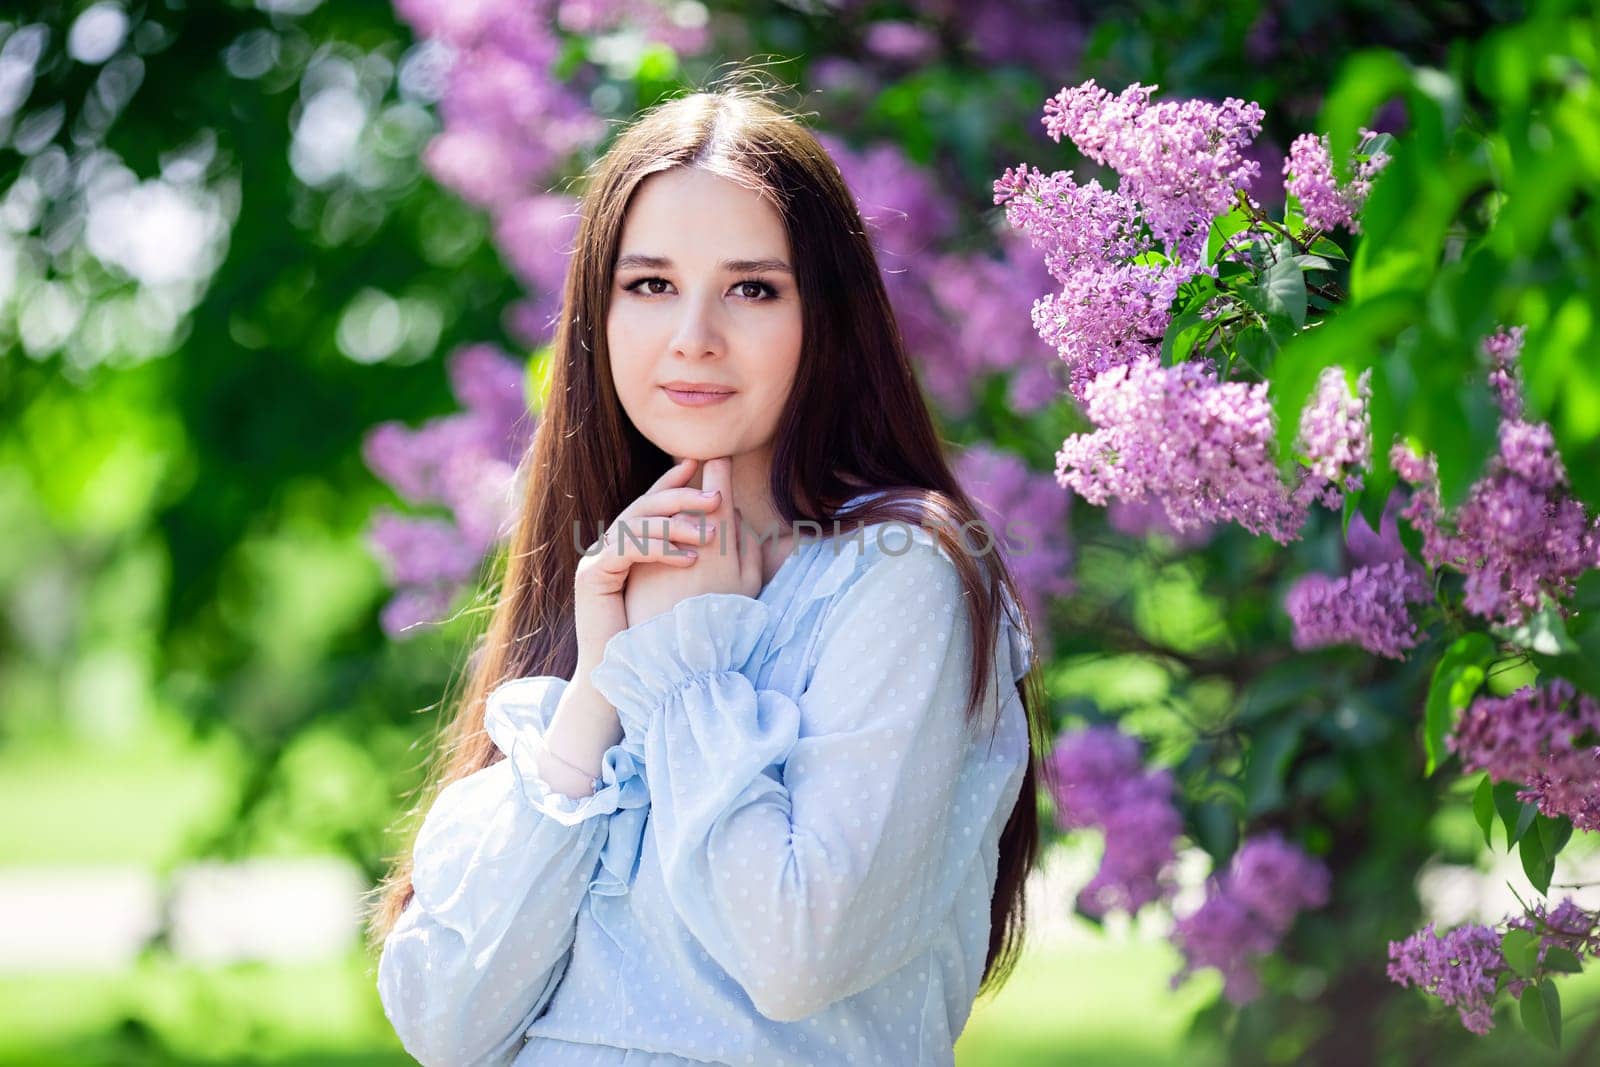 Adorable girl with long hair stands with lilac flowers, in the garden by Zakharova